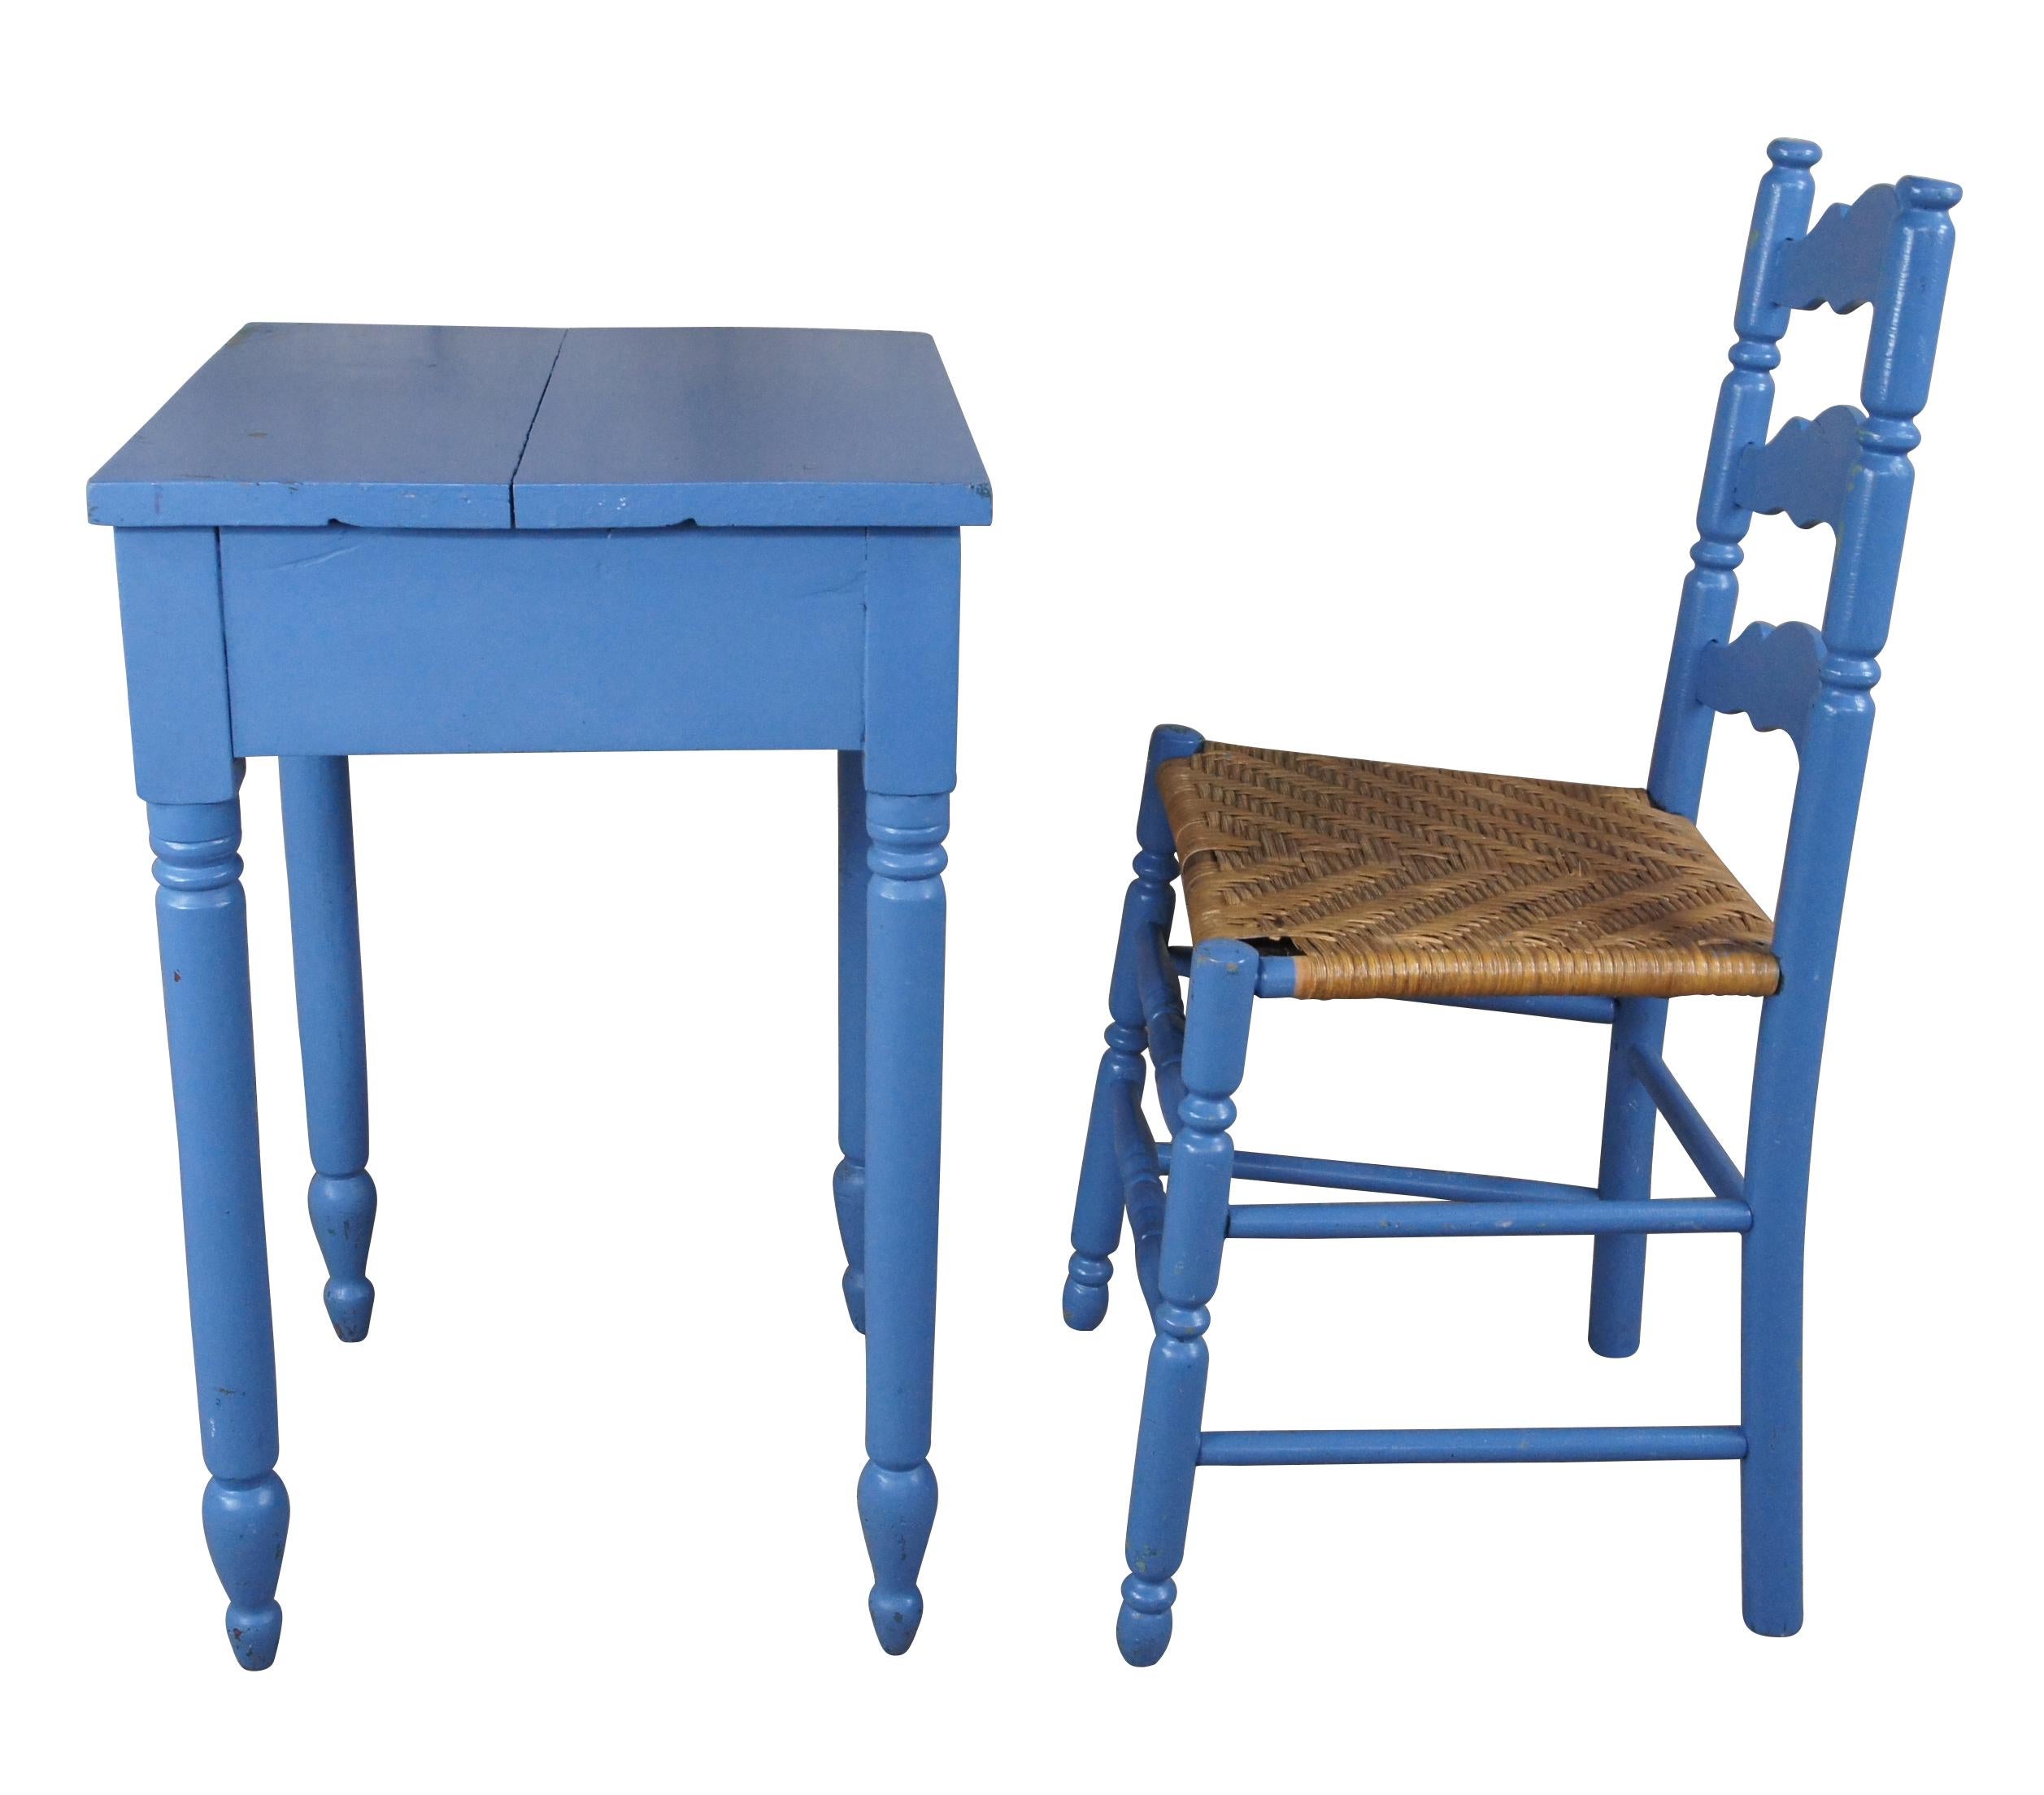 20th century Primitive table and Shaker chair. Made from hardwood with a blue painted finish. The table features turned legs and arrow feet. The chair has a ladder back and rush seat.

Table - 20.75